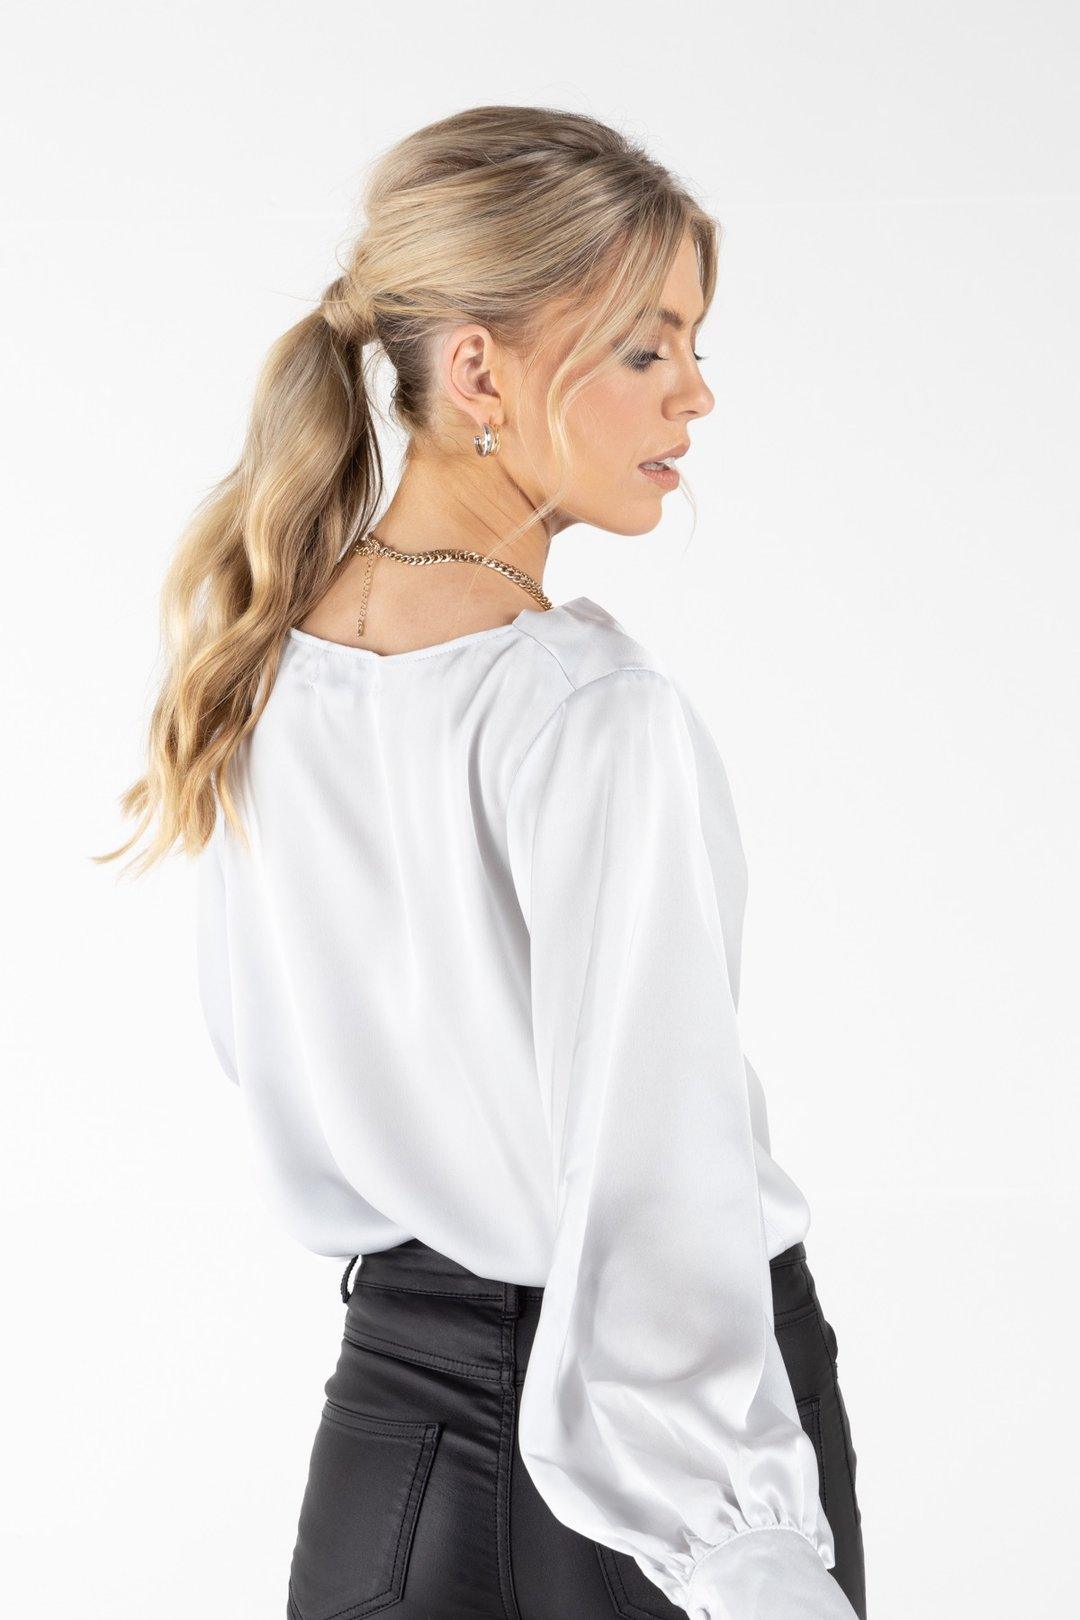 Outdazl - Lula Cowl Neck Top in Silver - OutDazl